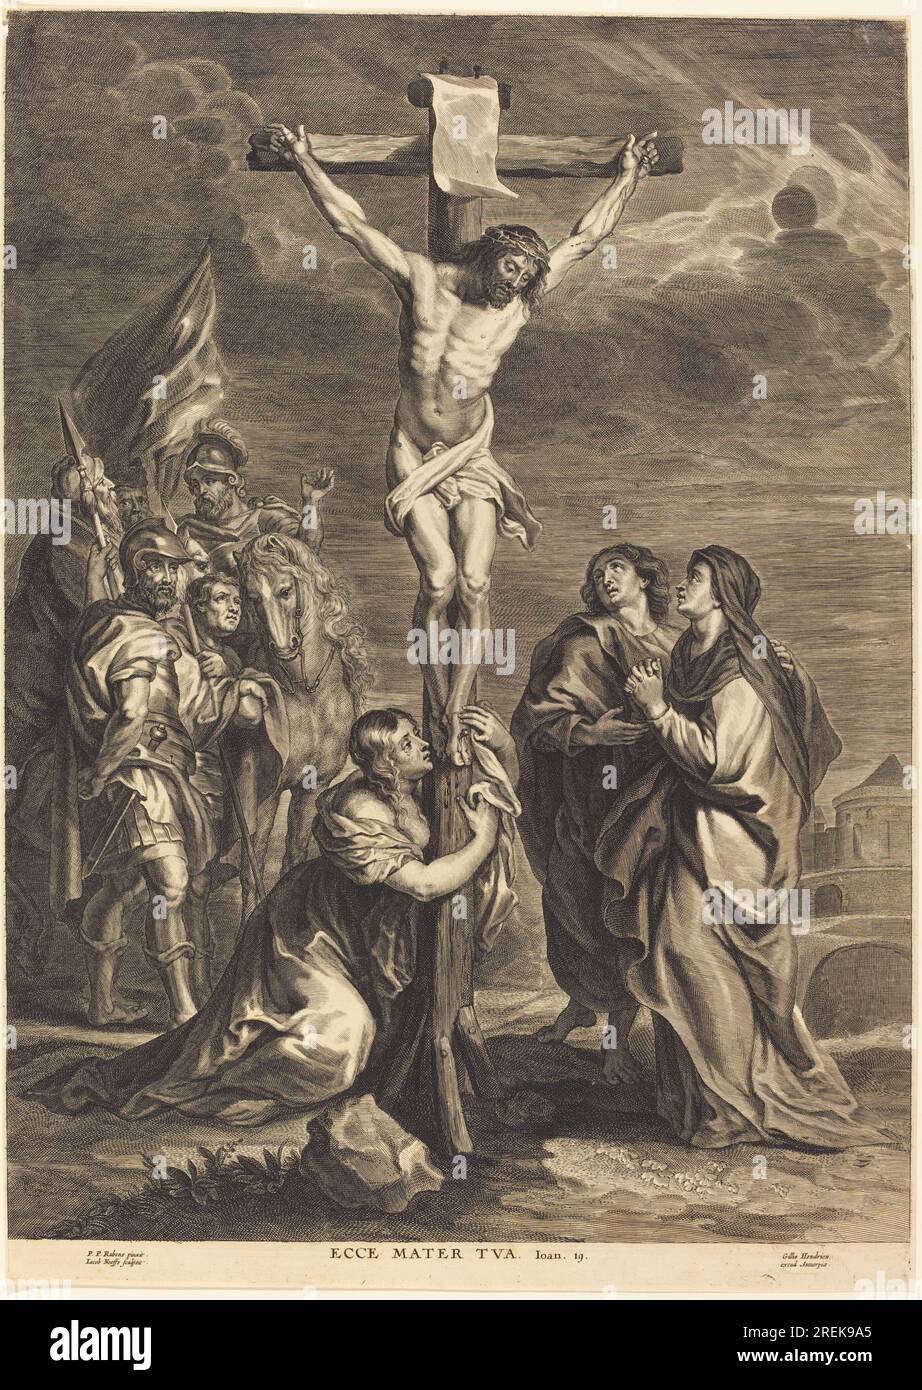 'Jacobus Neeffs, Christ on the Cross, engraving on laid paper, plate: 62.4 x 44.2 cm (24 9/16 x 17 3/8 in.) sheet: 62.8 x 44.7 cm (24 3/4 x 17 5/8 in.), Gift of David P. Tunick, 2009.127.22' Stock Photo